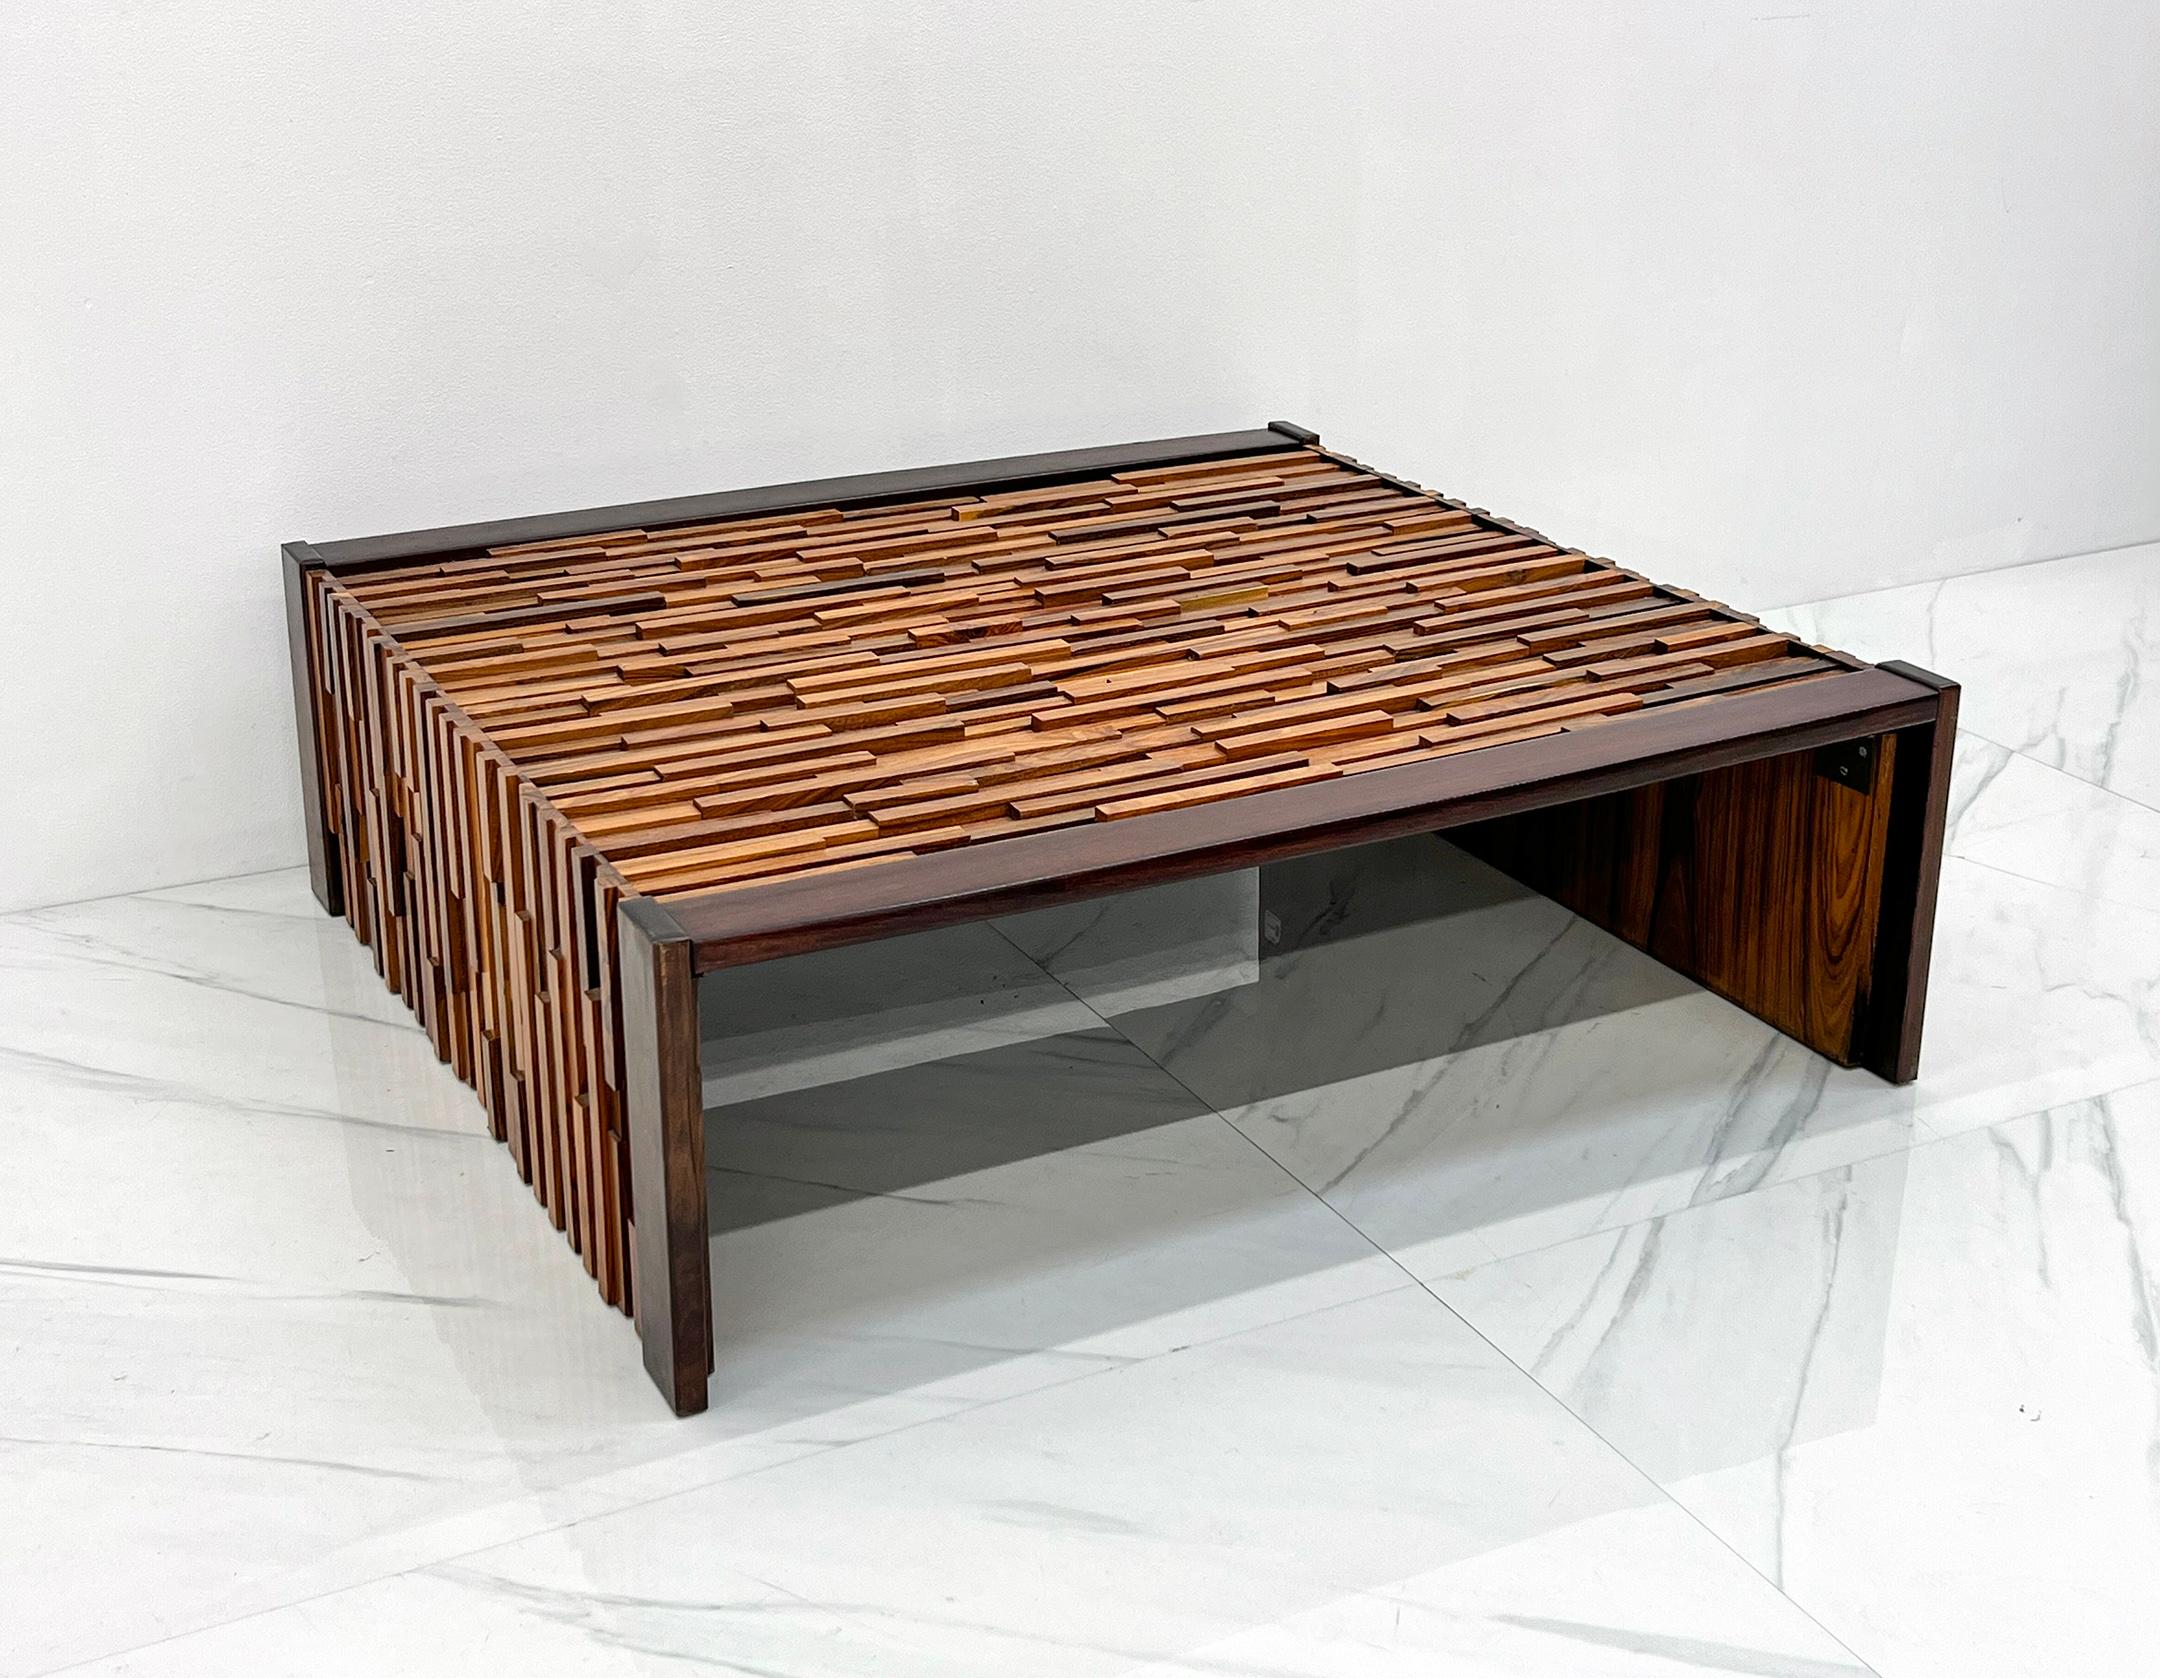 This coffee table is fabulous! Designed by Percival Lafer a Brazilian furniture designer known for his innovative and modern designs. One of his most iconic creations is the Percival Lafer folding table, which was first introduced in the 1970s.